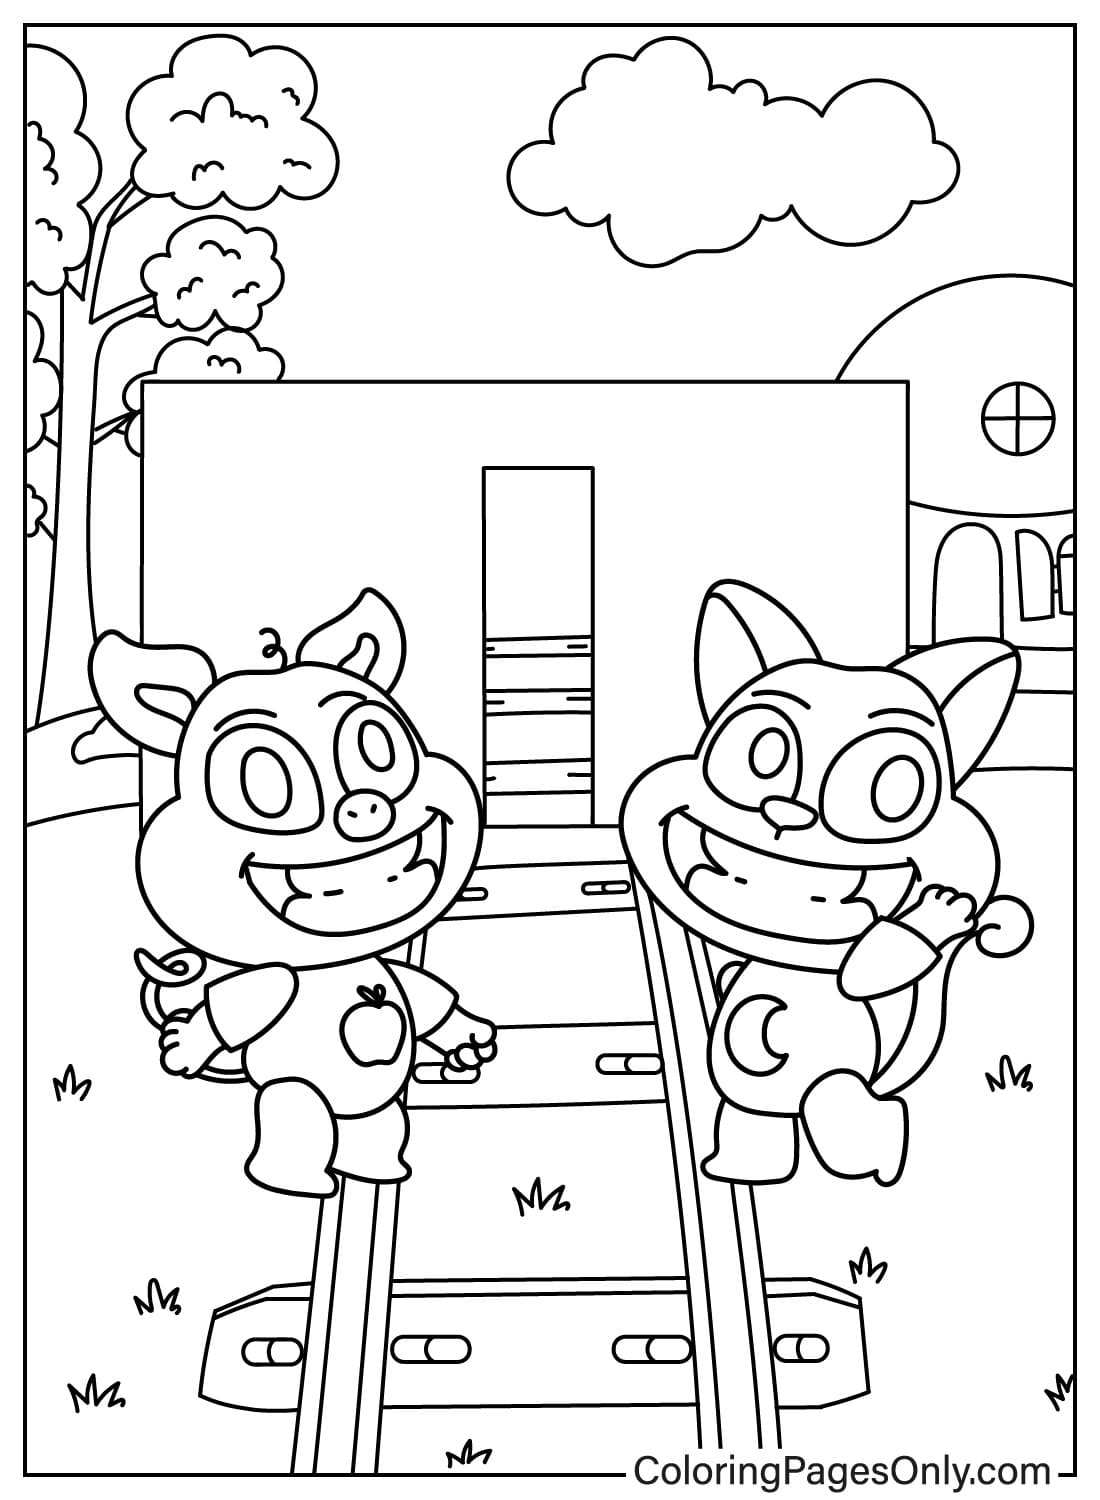 PickyPiggy and CatNap Coloring Page from PickyPiggy